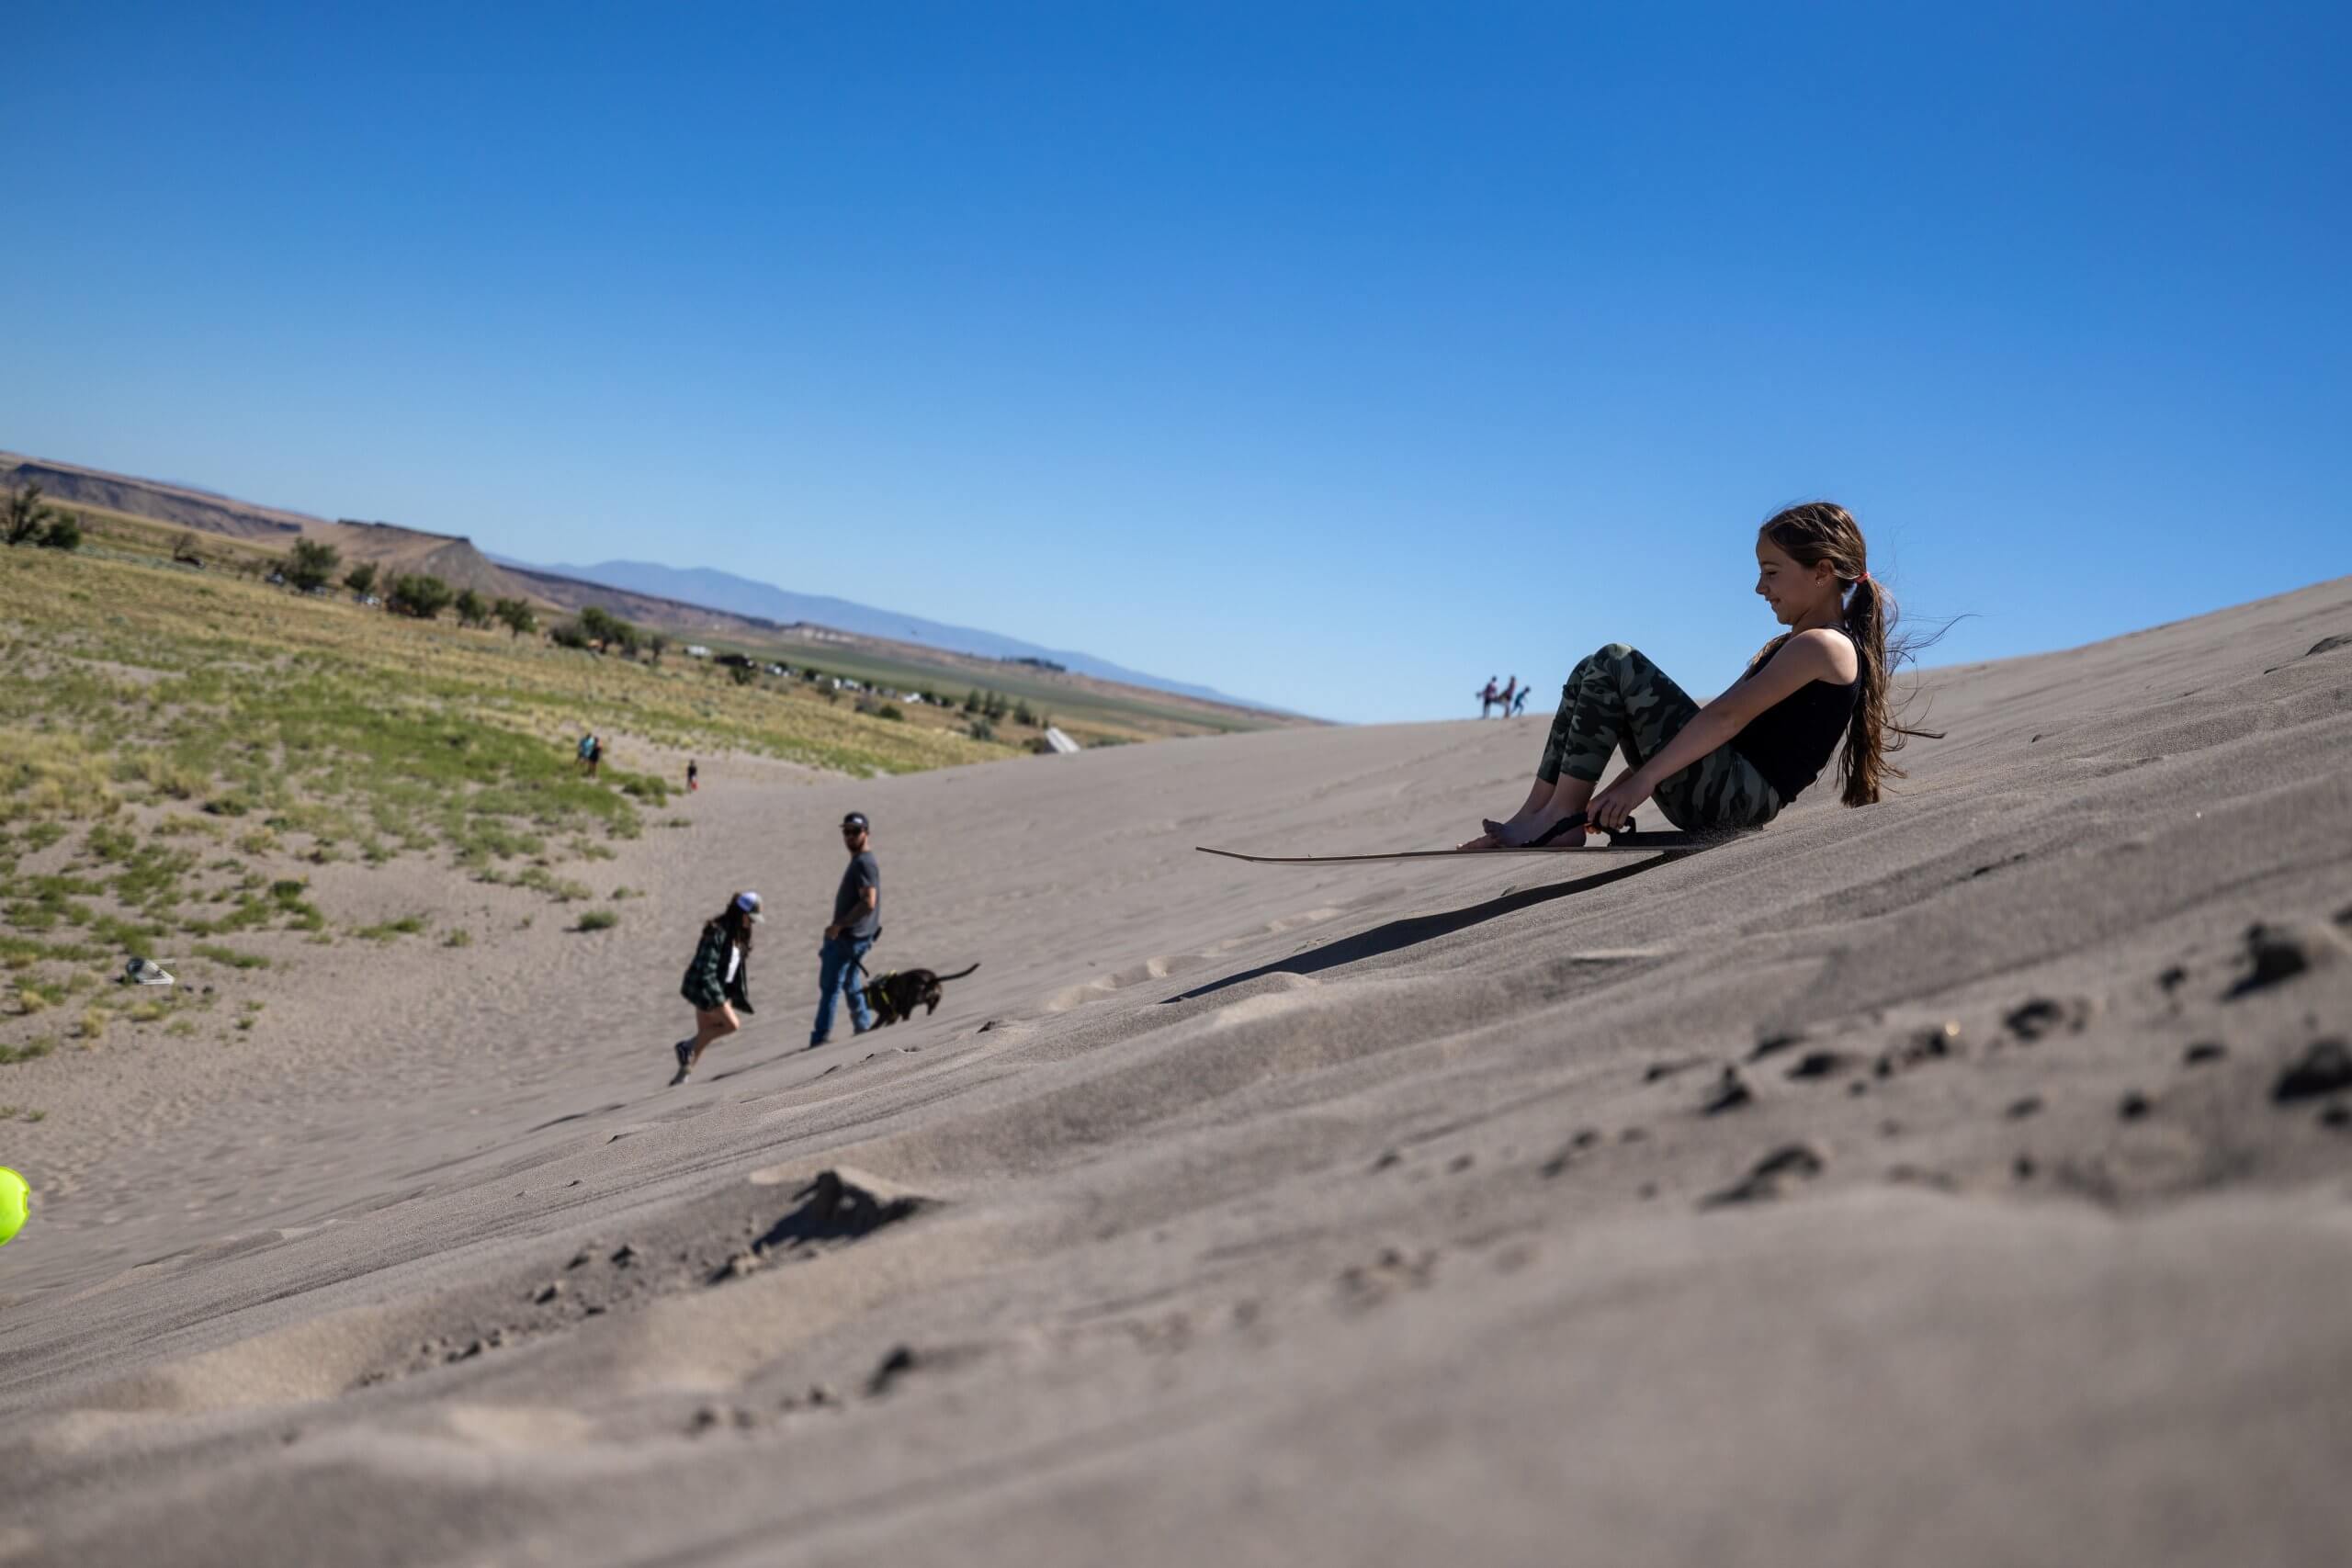 A girl slides down a sand dune on a board at Bruneau Dunes State Park.